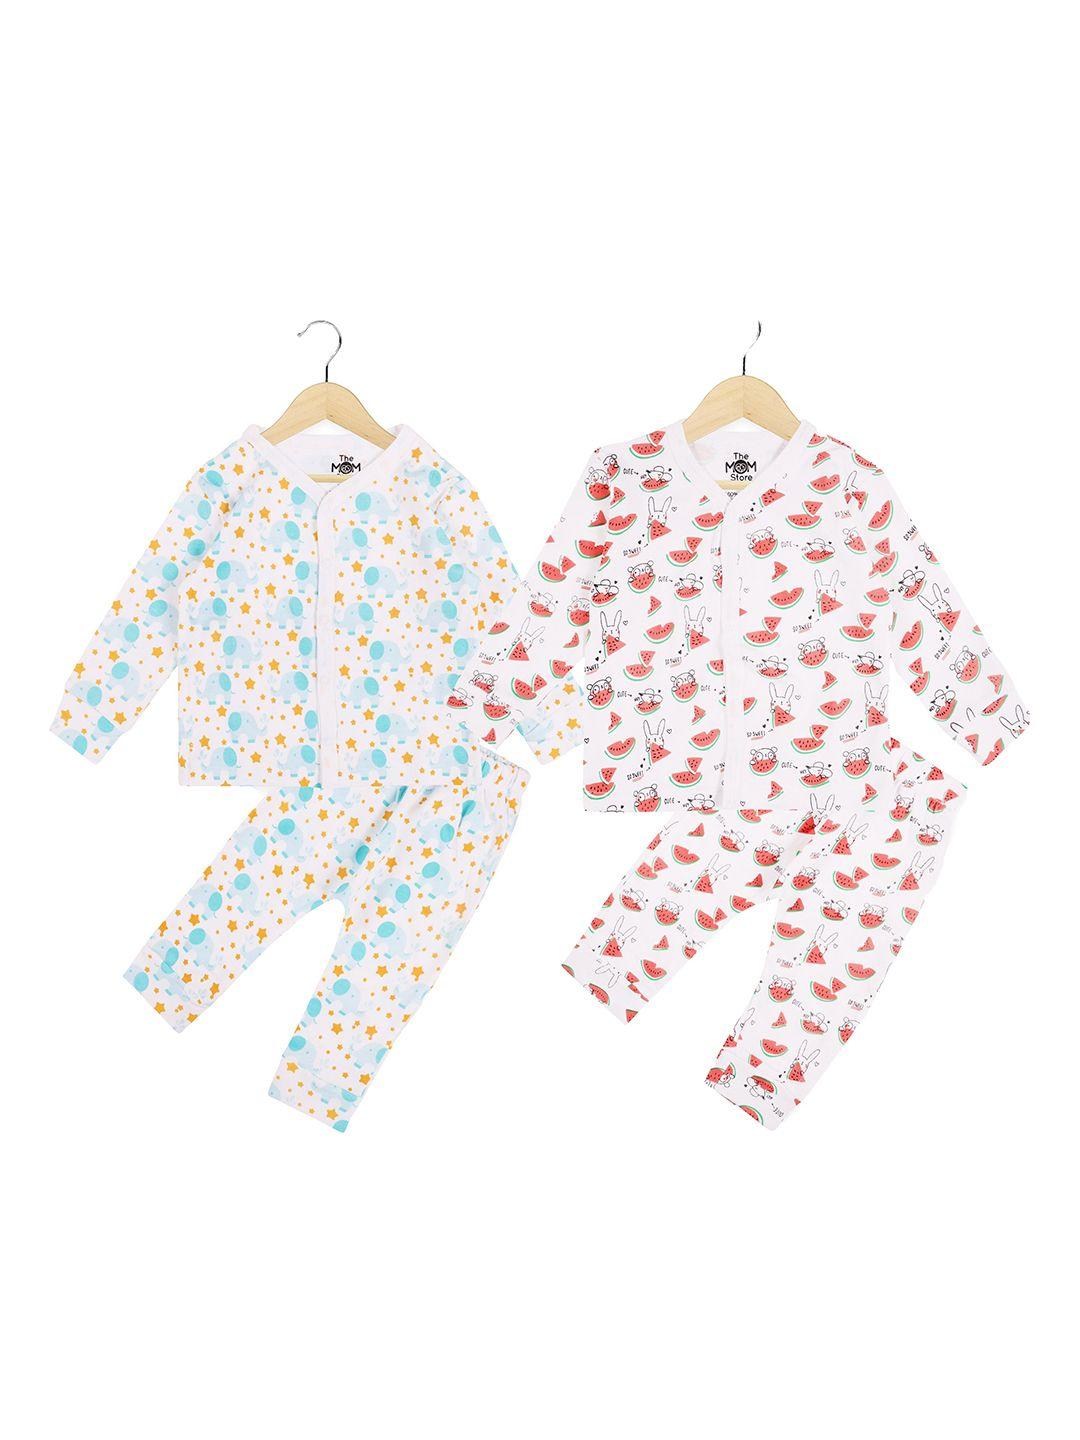 the mom store kids white & blue set of 2 printed cotton clothing set